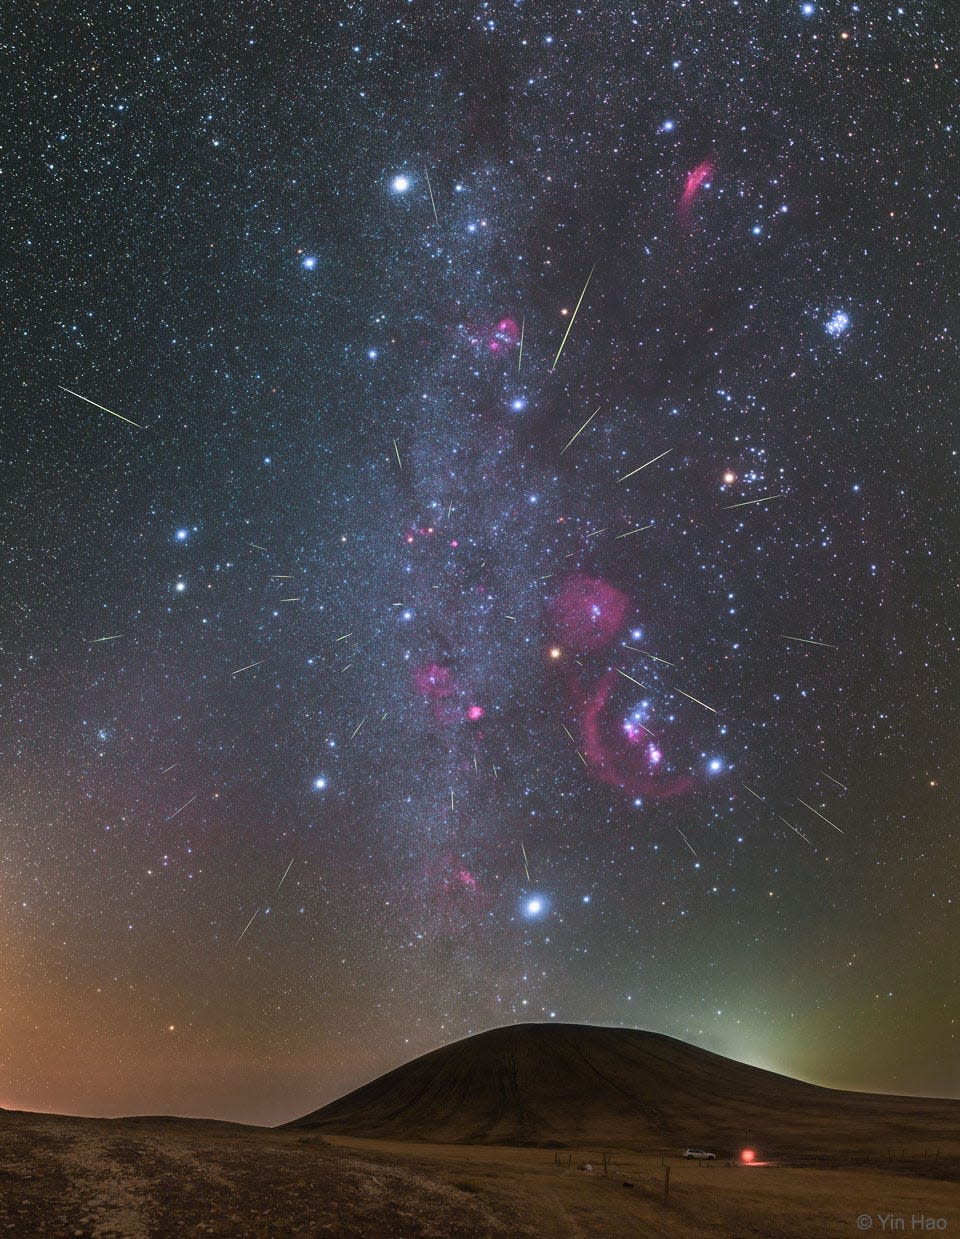 Orionids Meteors, shown here over Inner Mongolia. An Orionids meteor shower will be visible from Bucks County beginning on Tuesday, Sept. 26. NASA said peak viewing conditions for the Orionids meteor shower will be Saturday, Oct. 21.